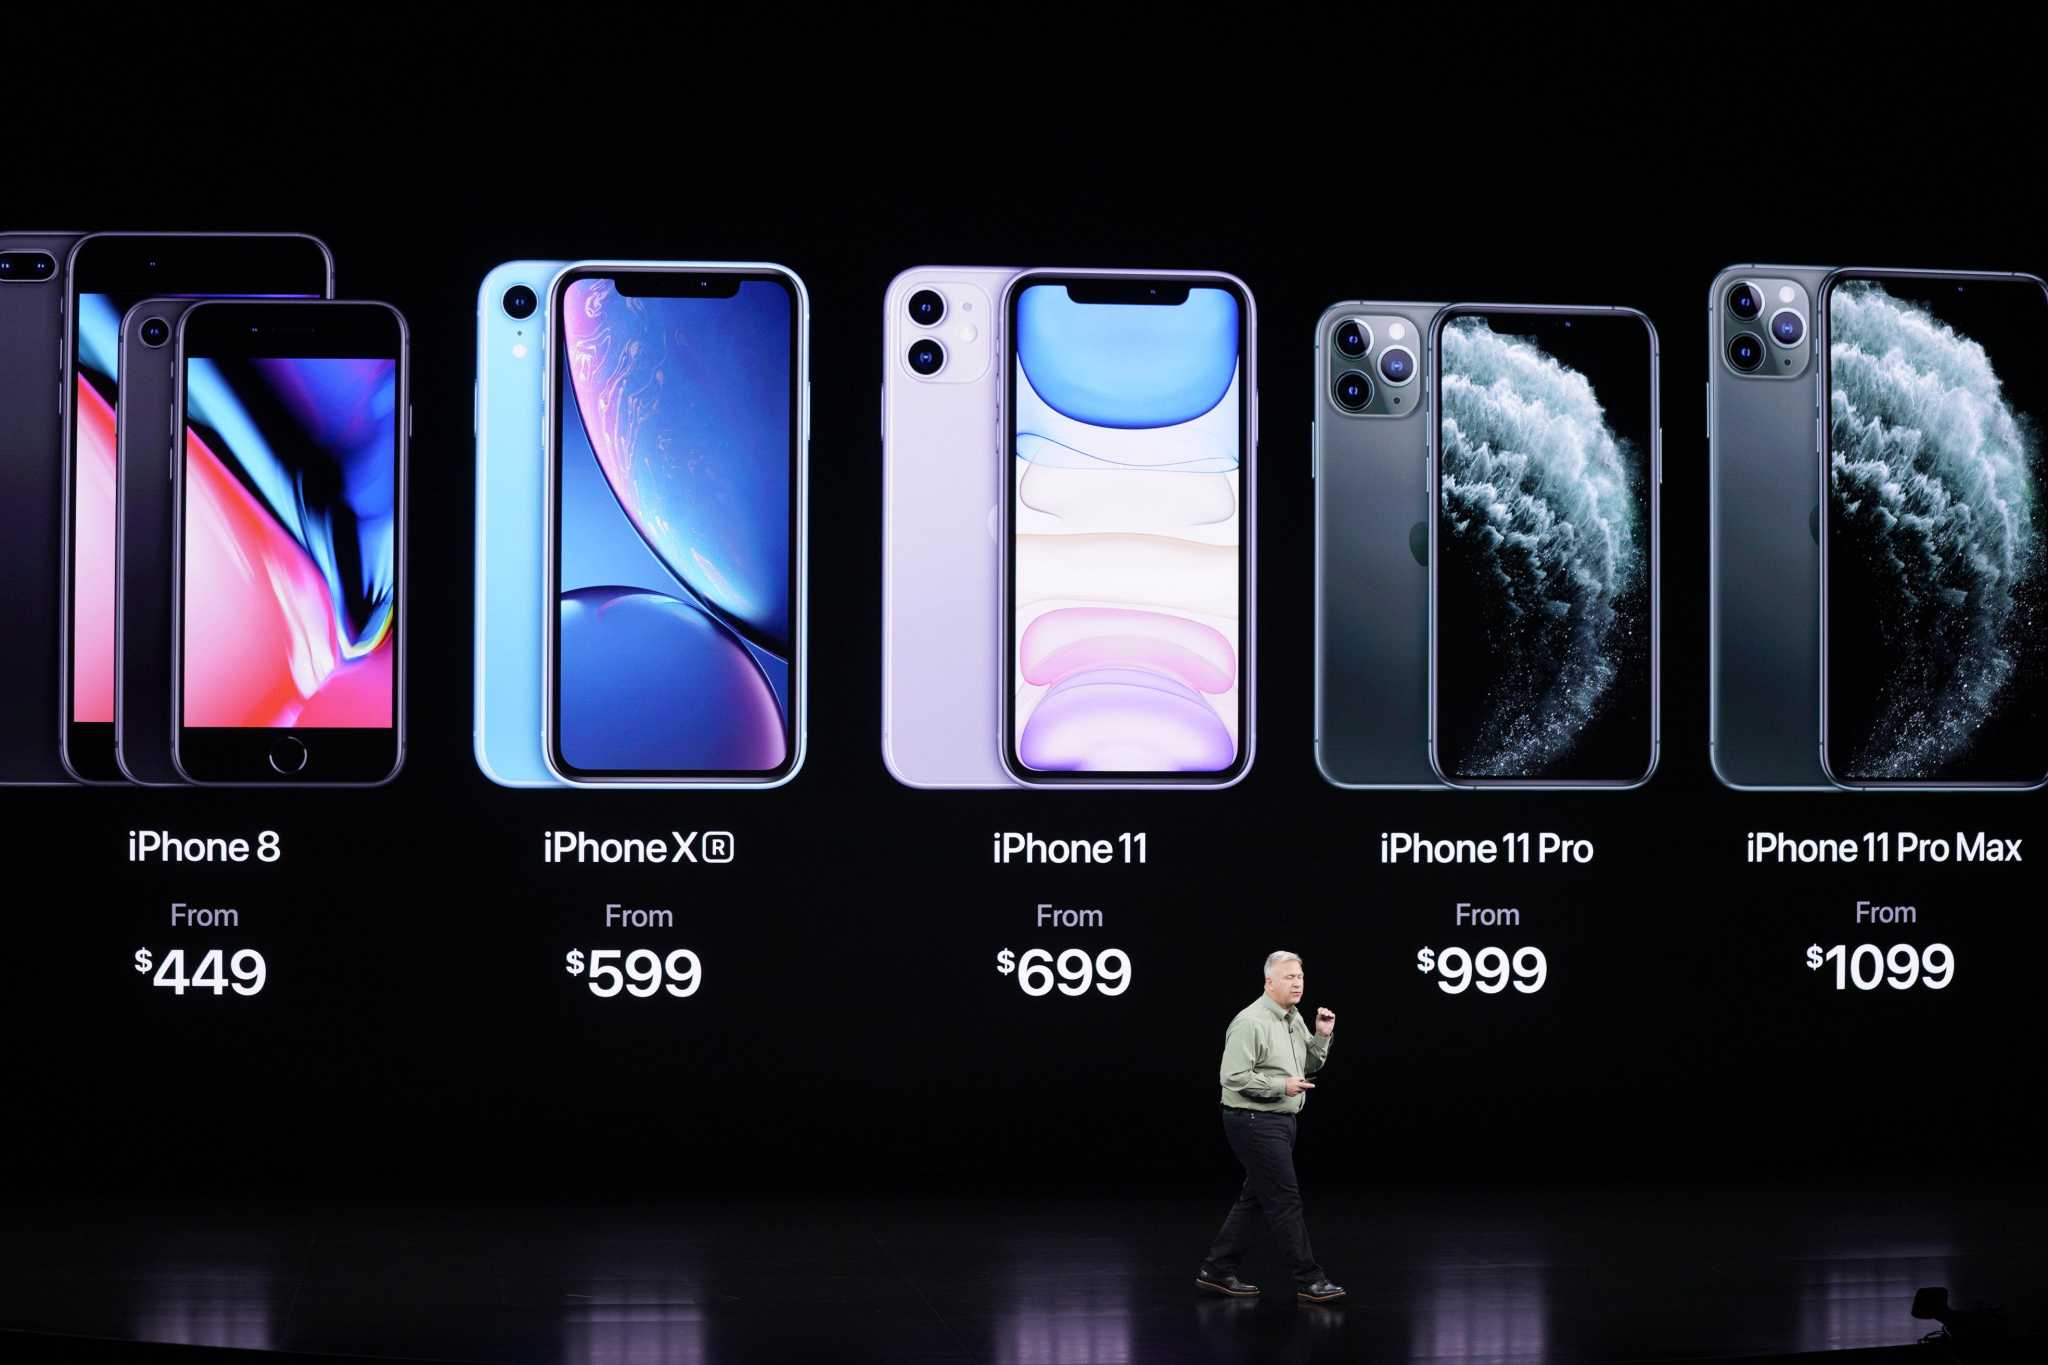 Should you get an iPhone 11? As always, it depends.